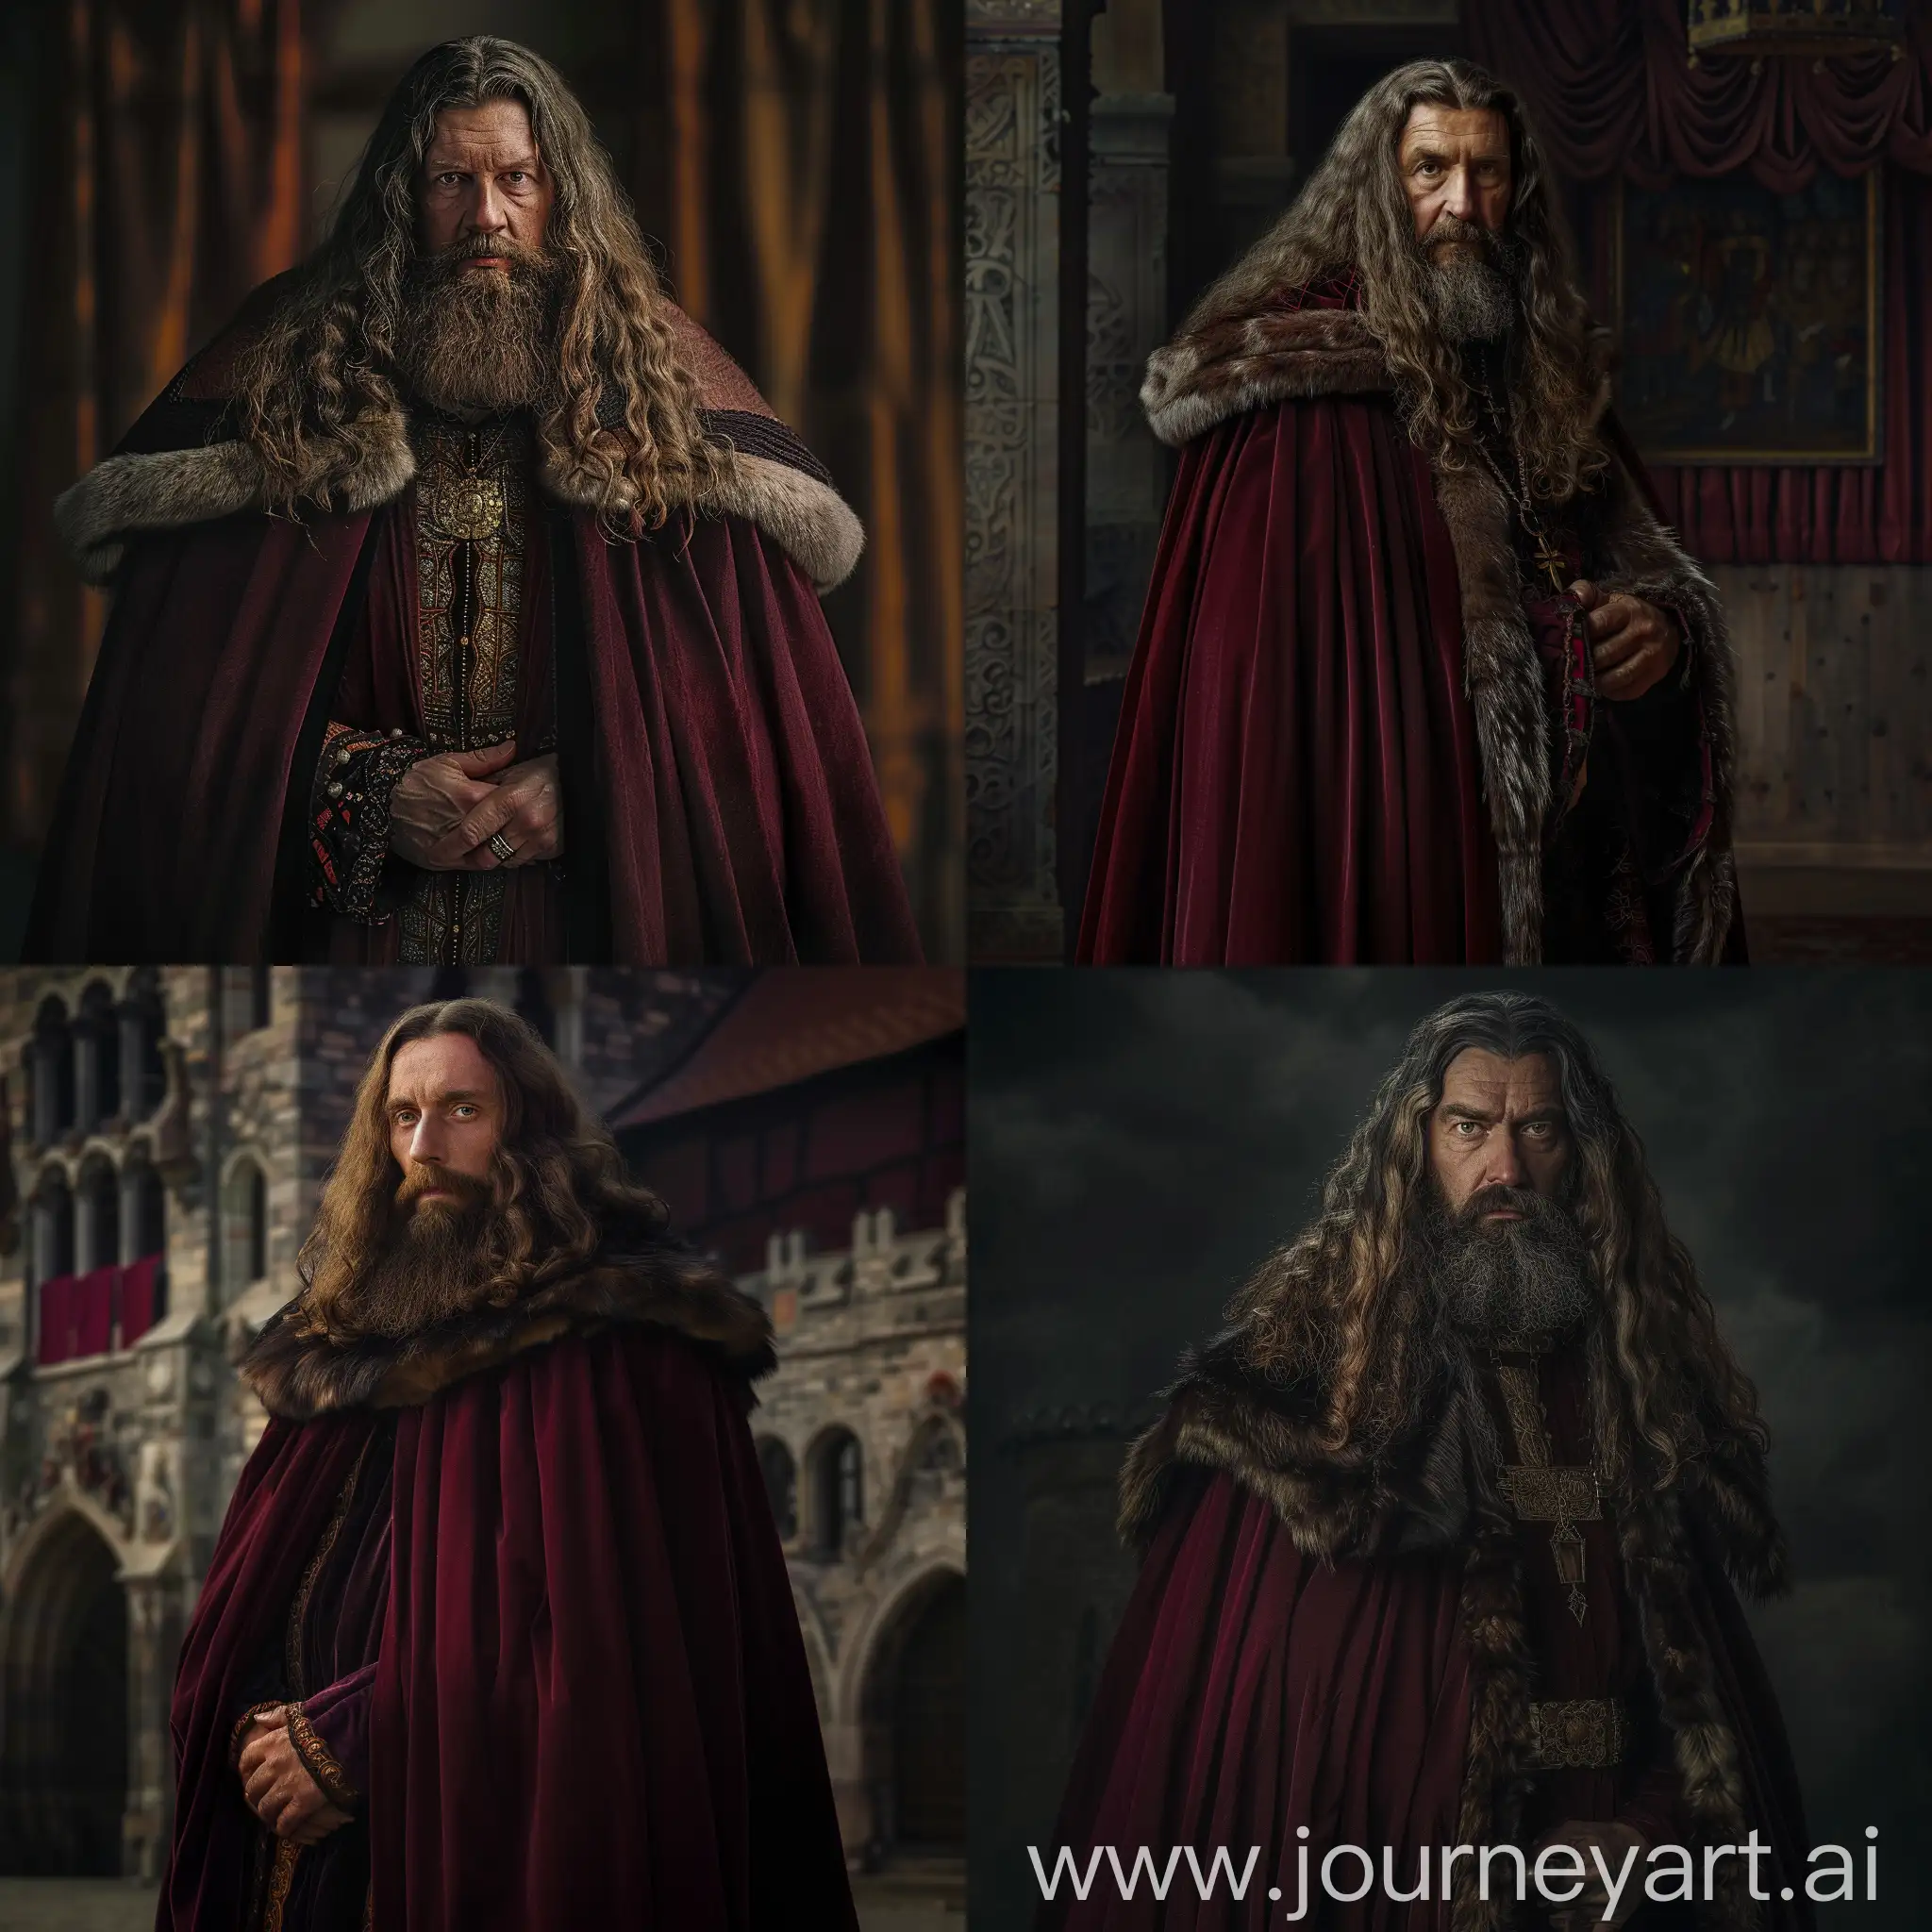 Polish king Casimir III The Great, depicted in dark red robe, noble cape with fur collar, long wavy hair, long beard, prominent face, standing tall at his palace, looking at the camera, cinematic lighting